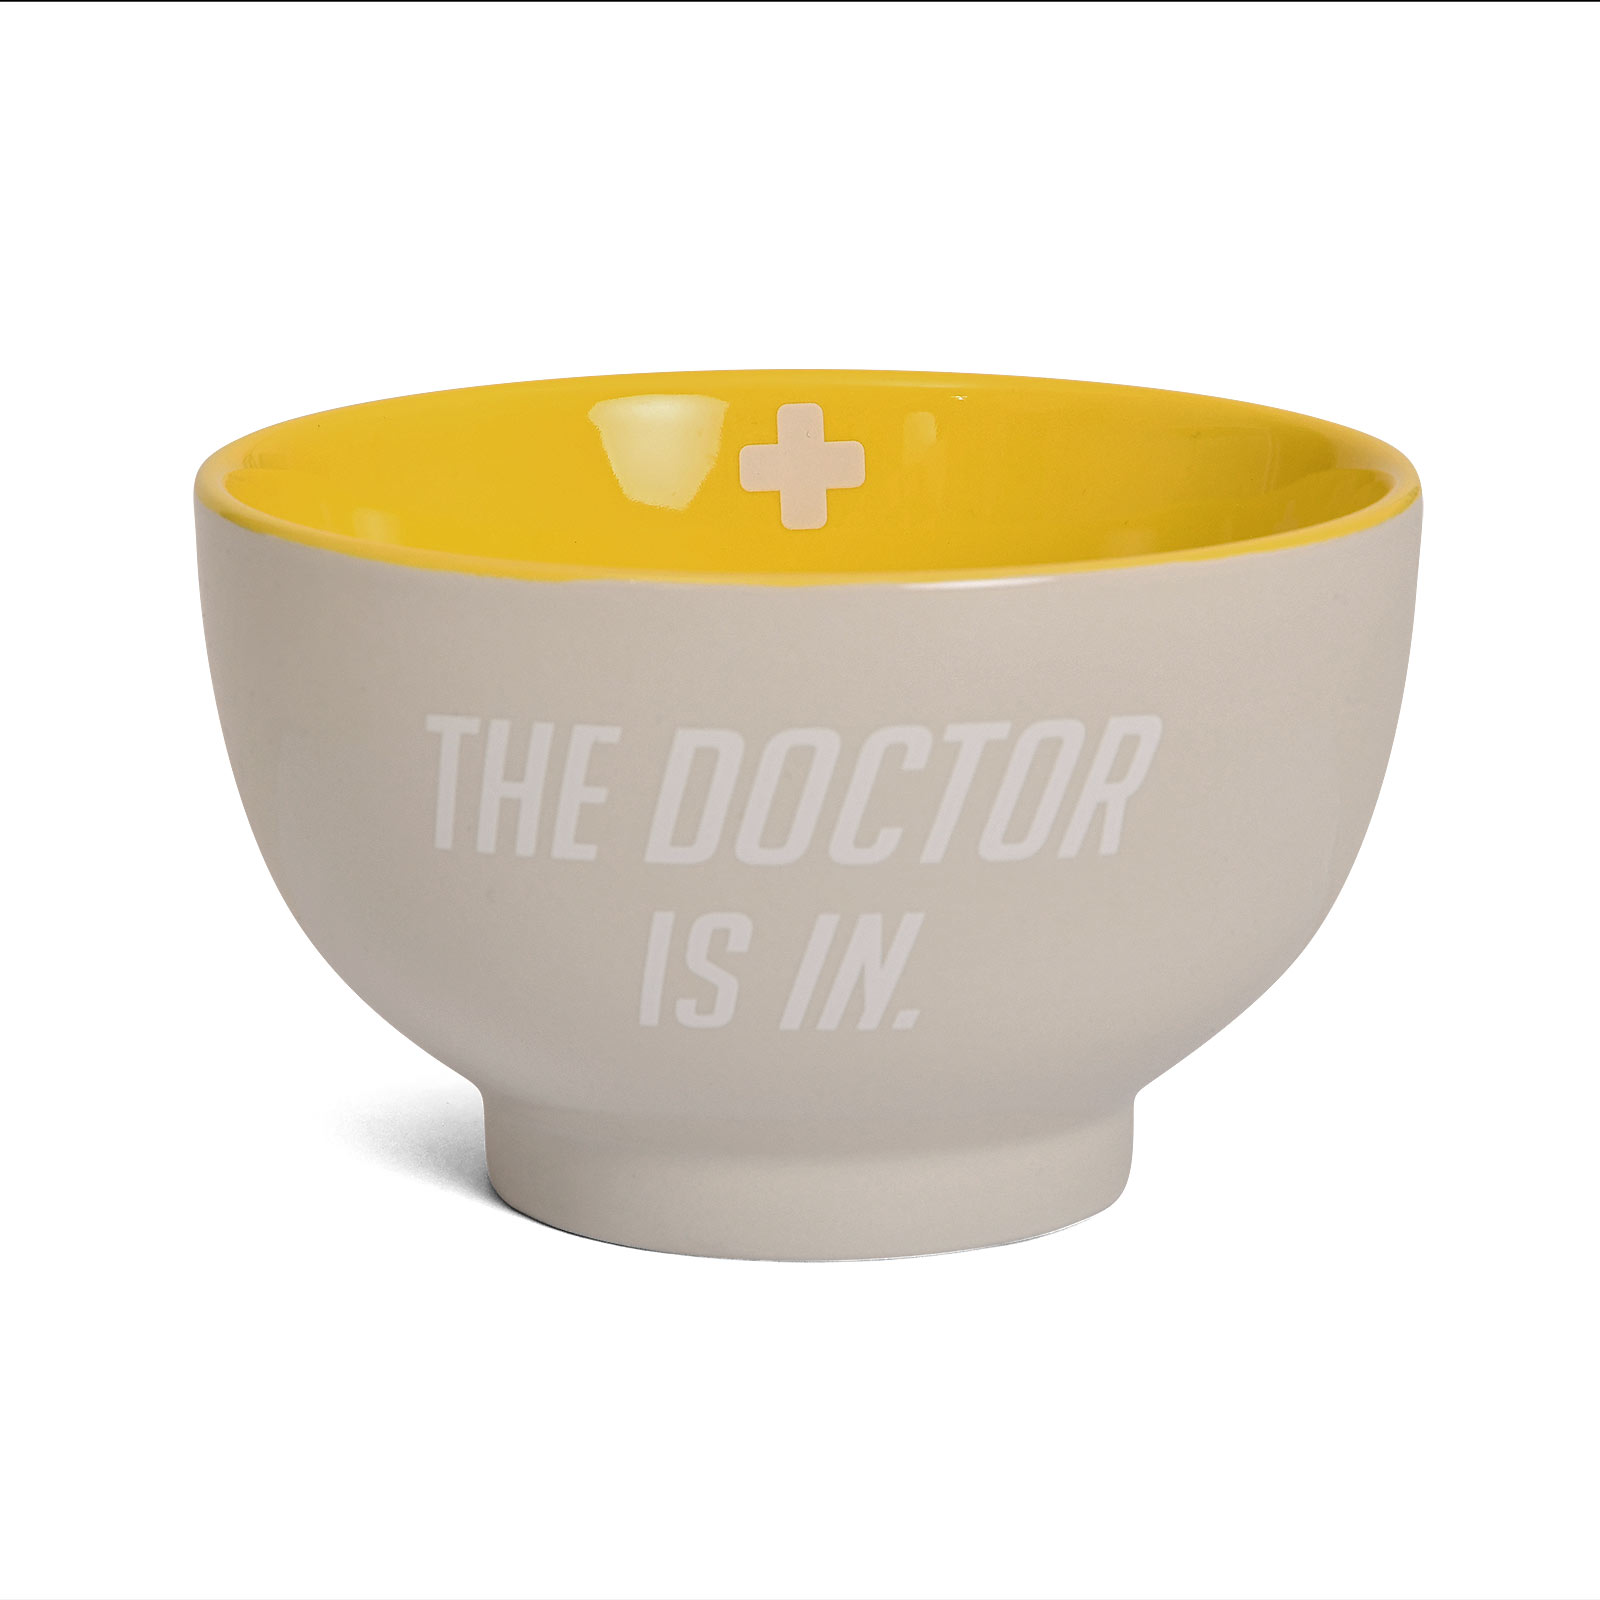 Overwatch - Mercy Cereal Bowl